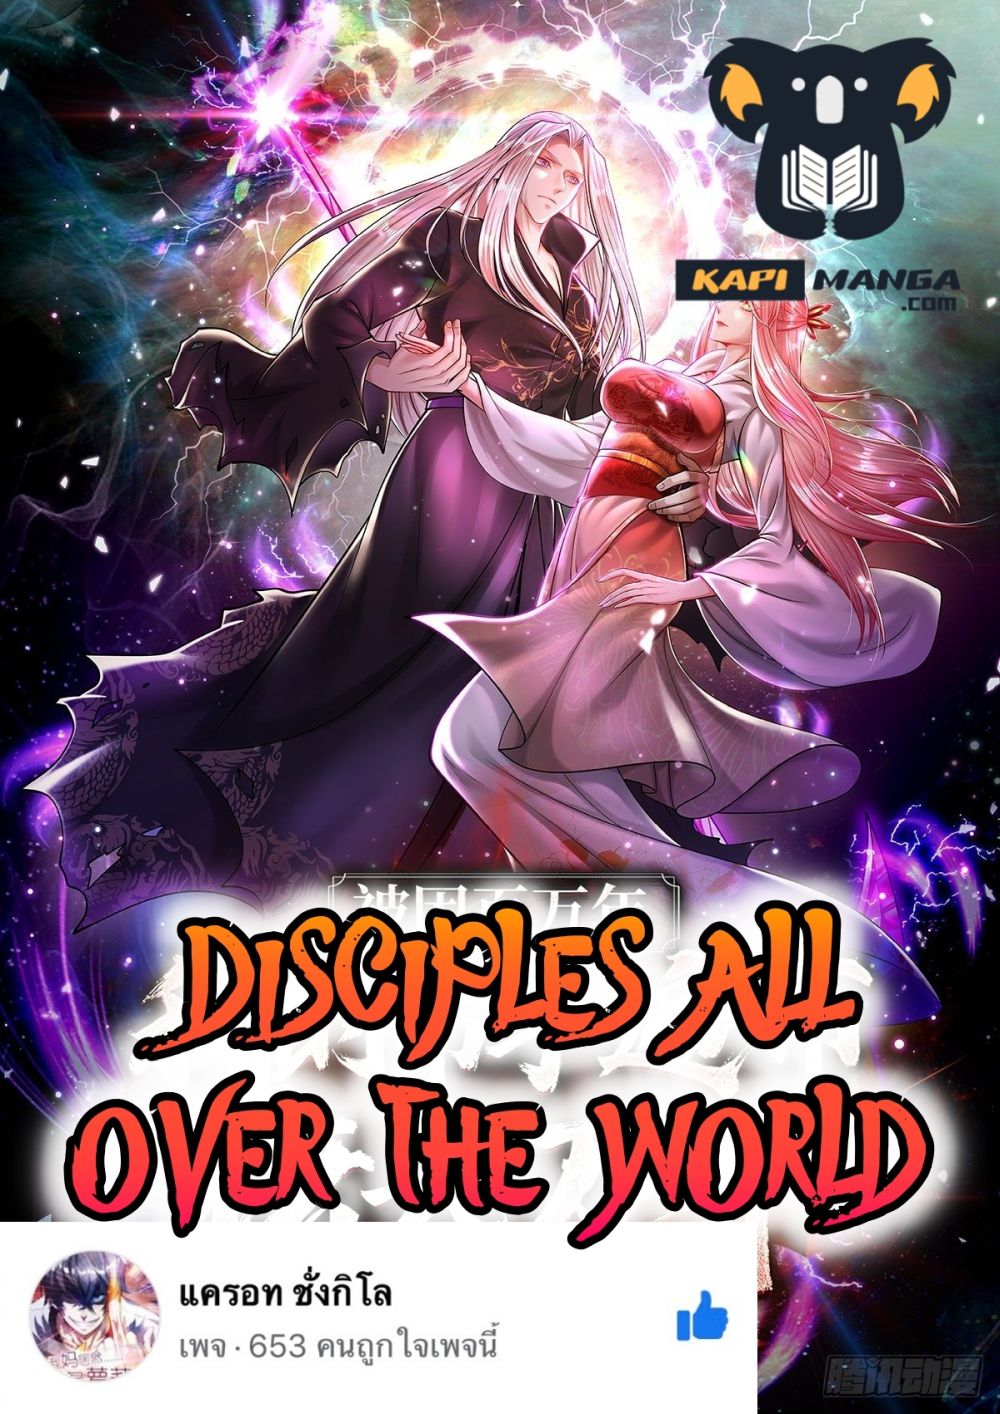 Disciples All Over the World à¸à¸­à¸à¸à¸µà¹ 26 (1)